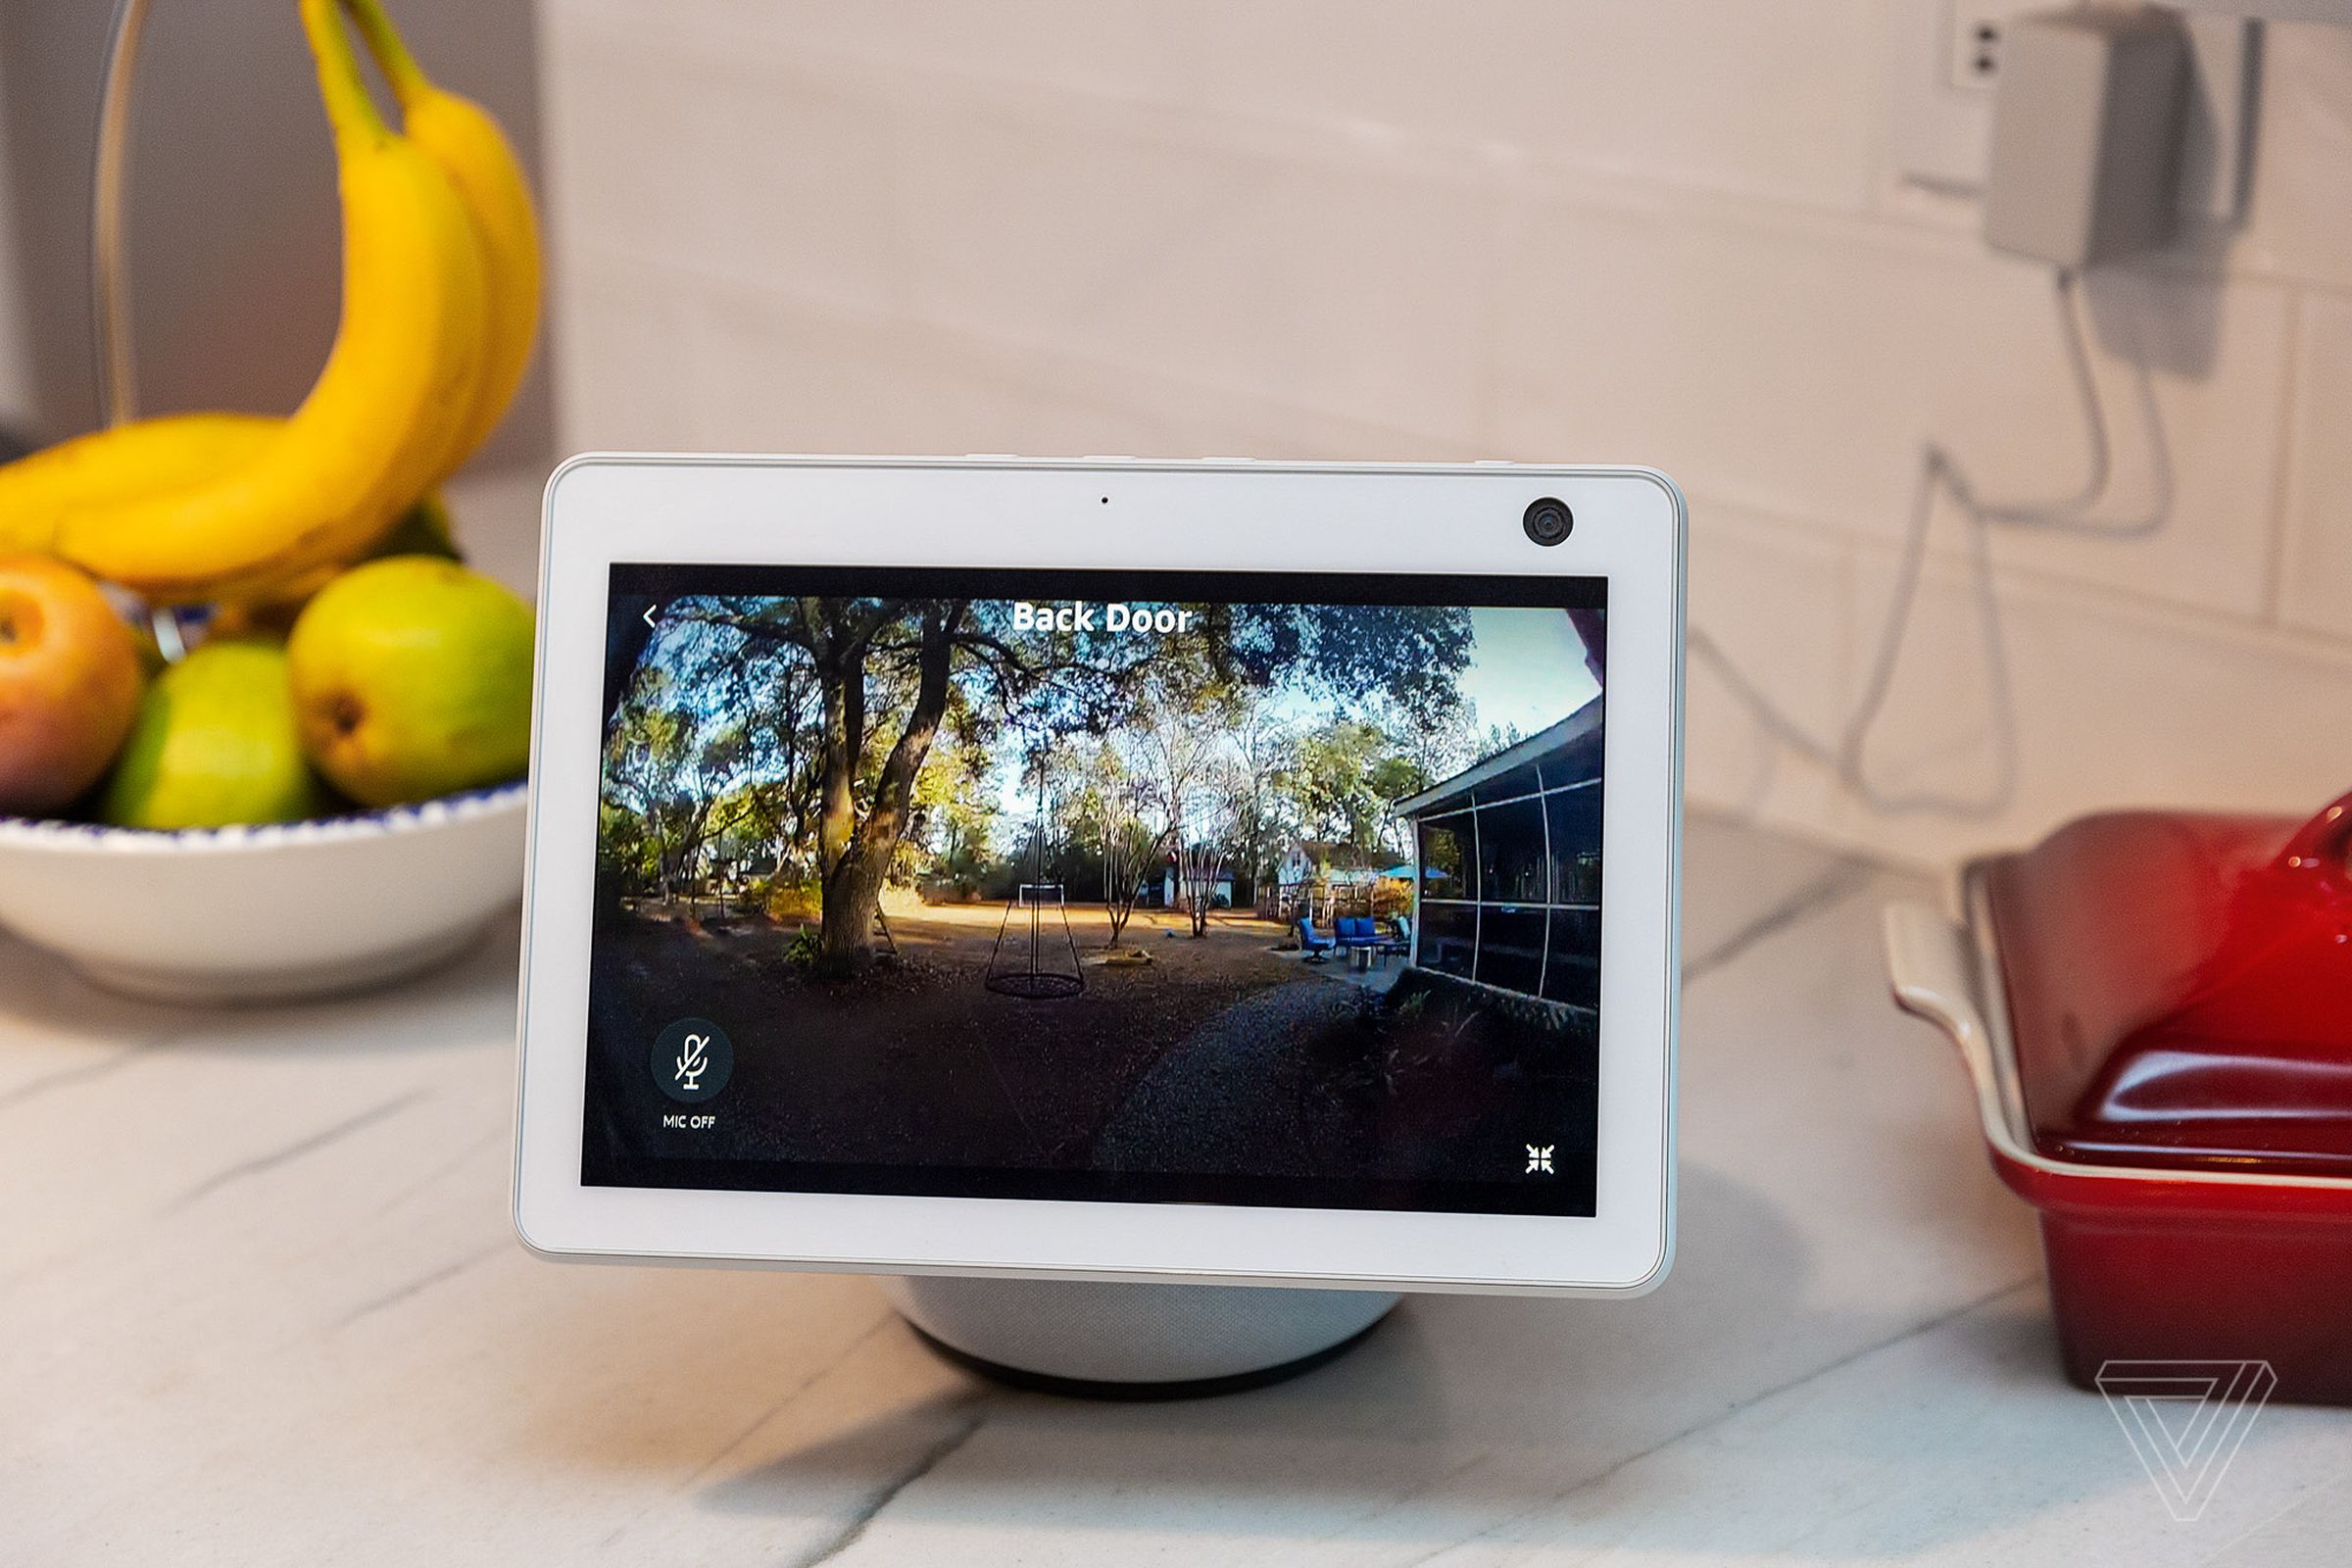 Ring doorbell cameras can stream to Amazon Echo Show smart displays, and show the feed automatically if someone presses the doorbell.